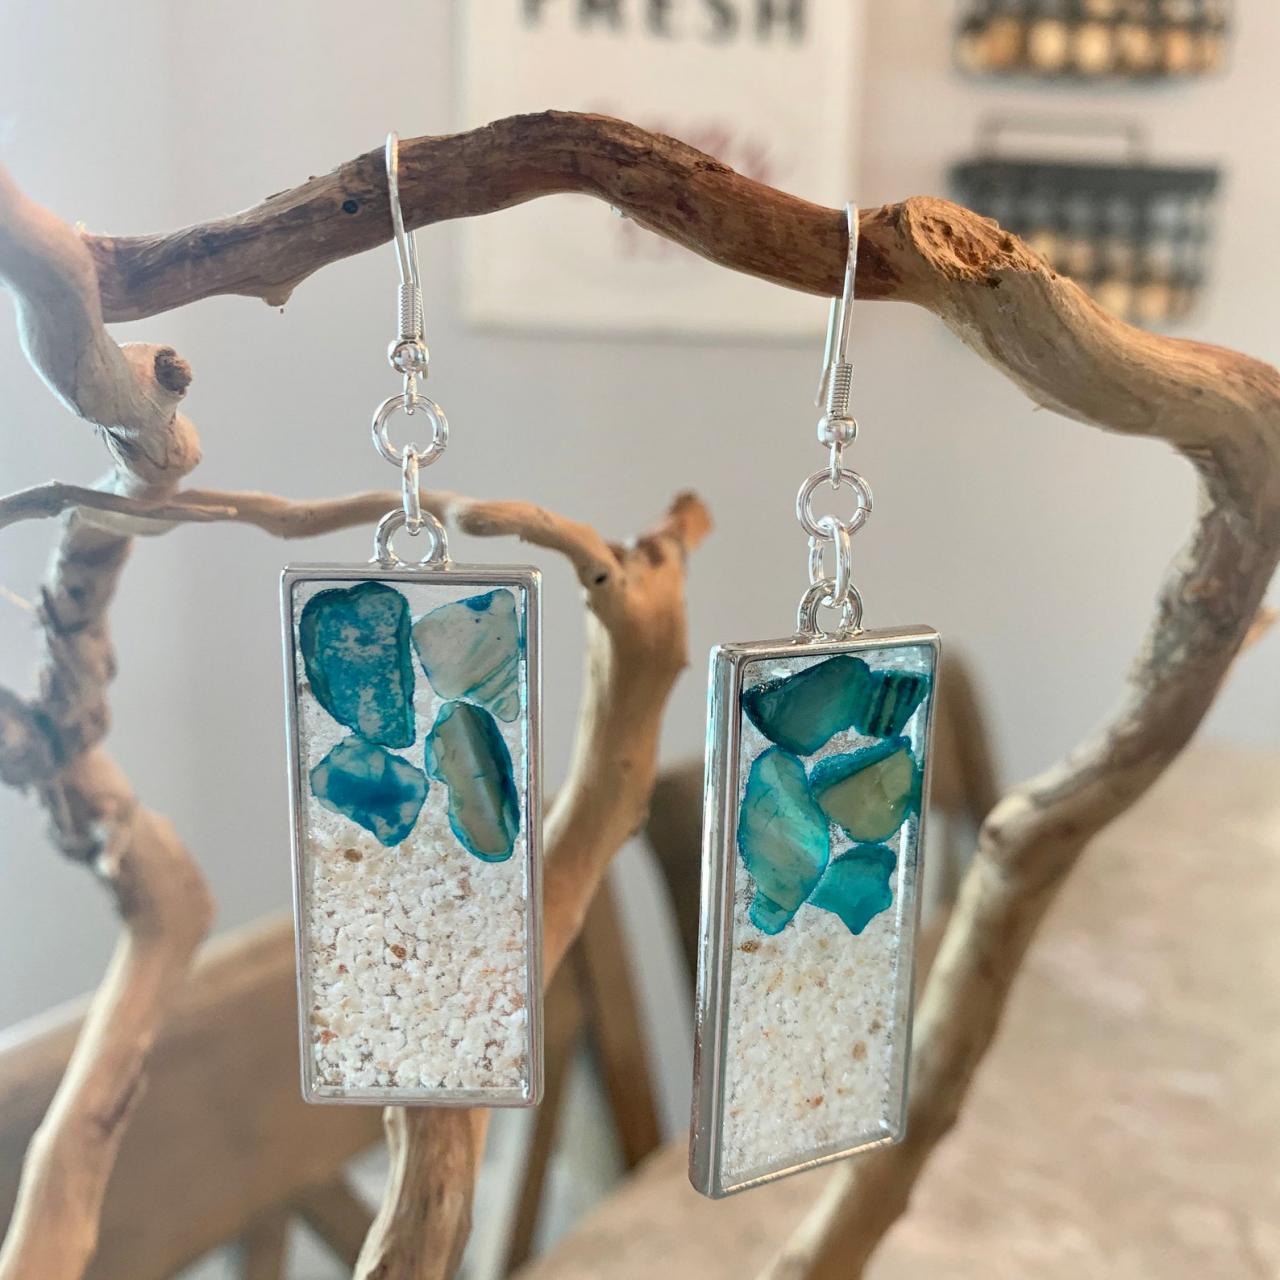 Crushed shell resin earrings,shells and sand,beach jewelry, jewelry for women,summer earrings,wave earrings,nature,natural jewelry,boho,gift